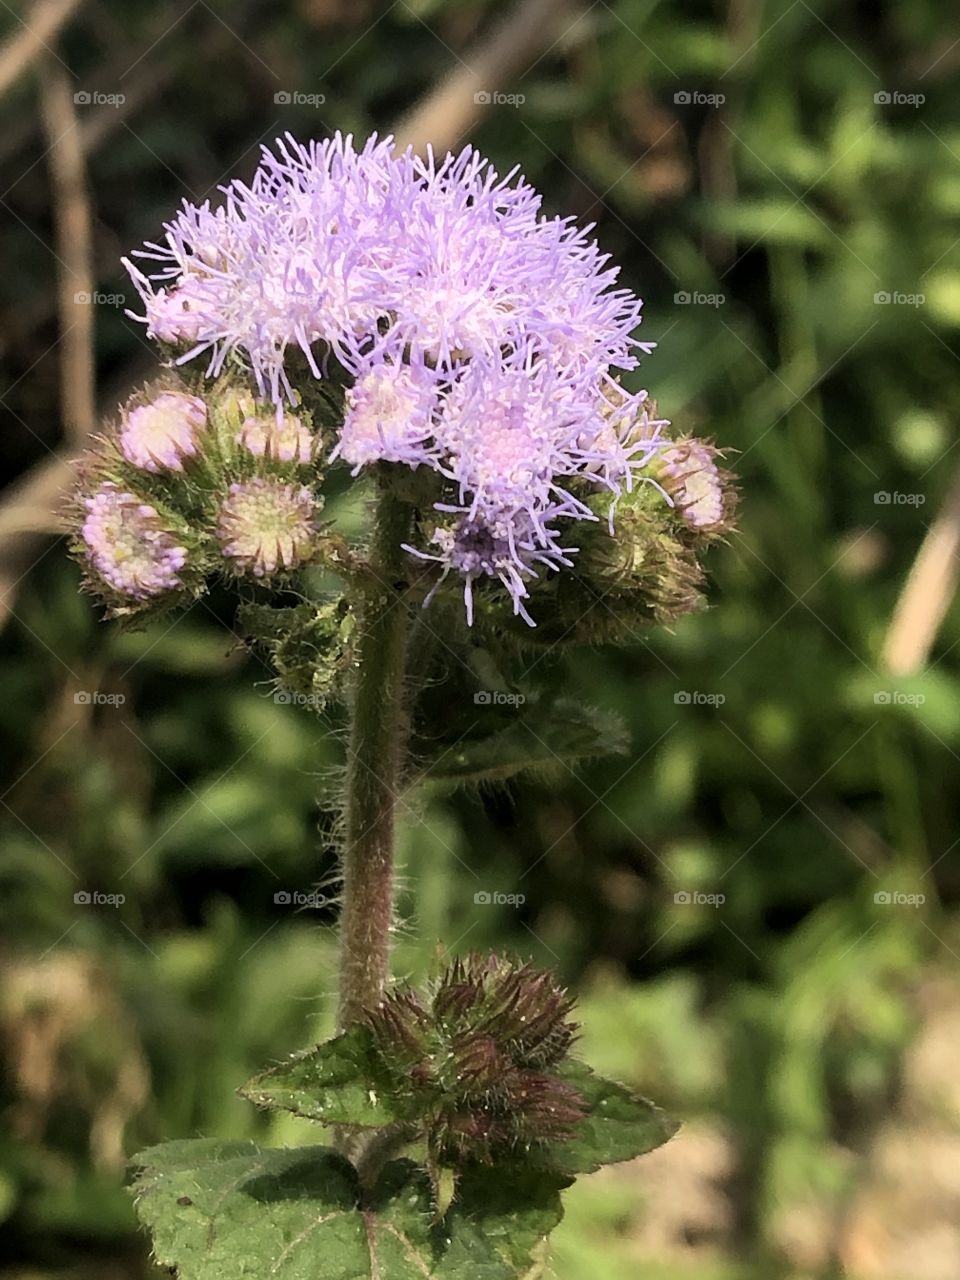 AGERATUM a tough plant that is a favorite for many gardens. Beautiful blue annuals known for their powder puff blooms.